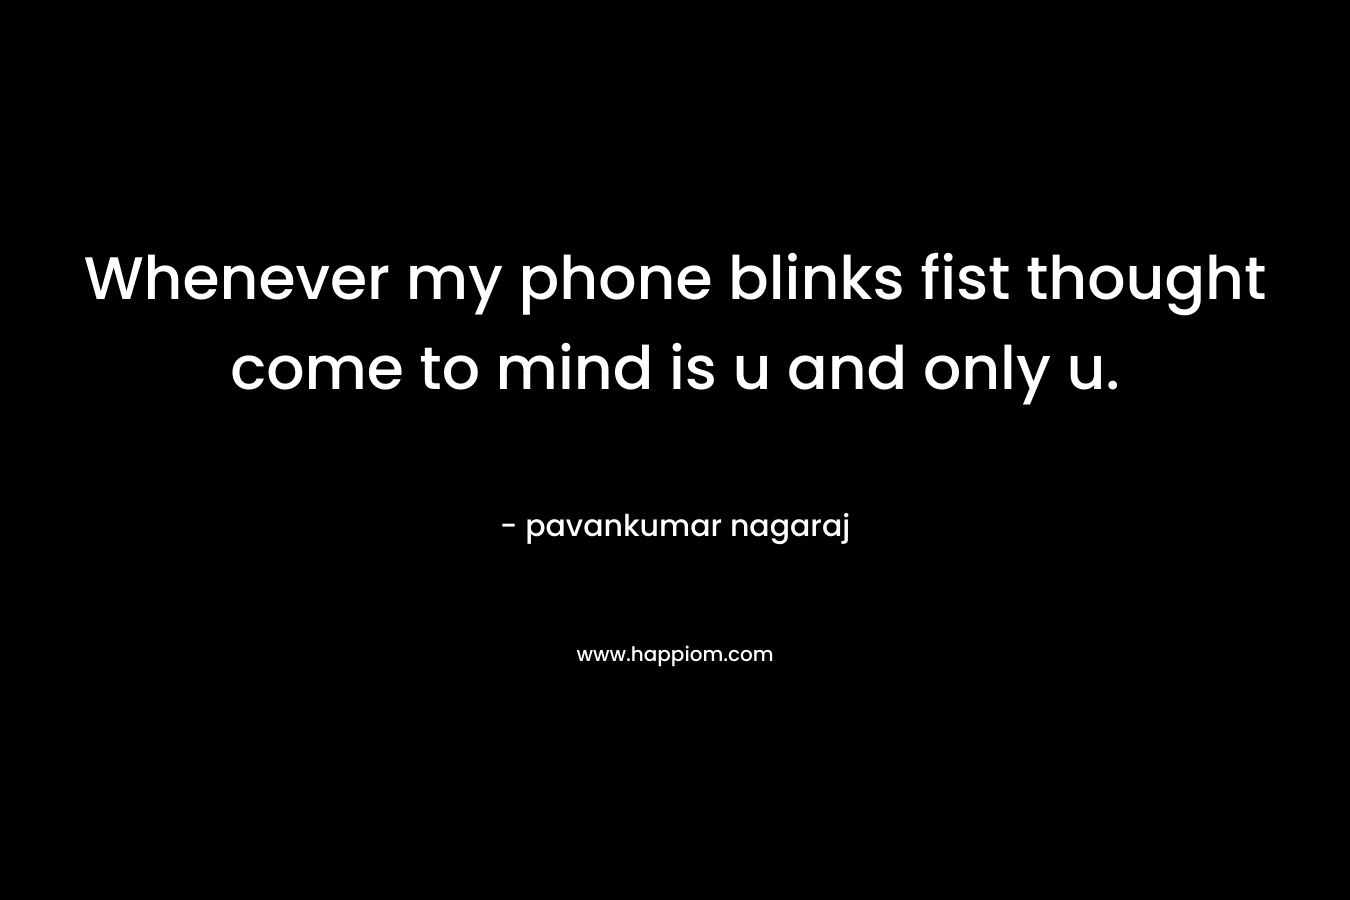 Whenever my phone blinks fist thought come to mind is u and only u. – pavankumar nagaraj